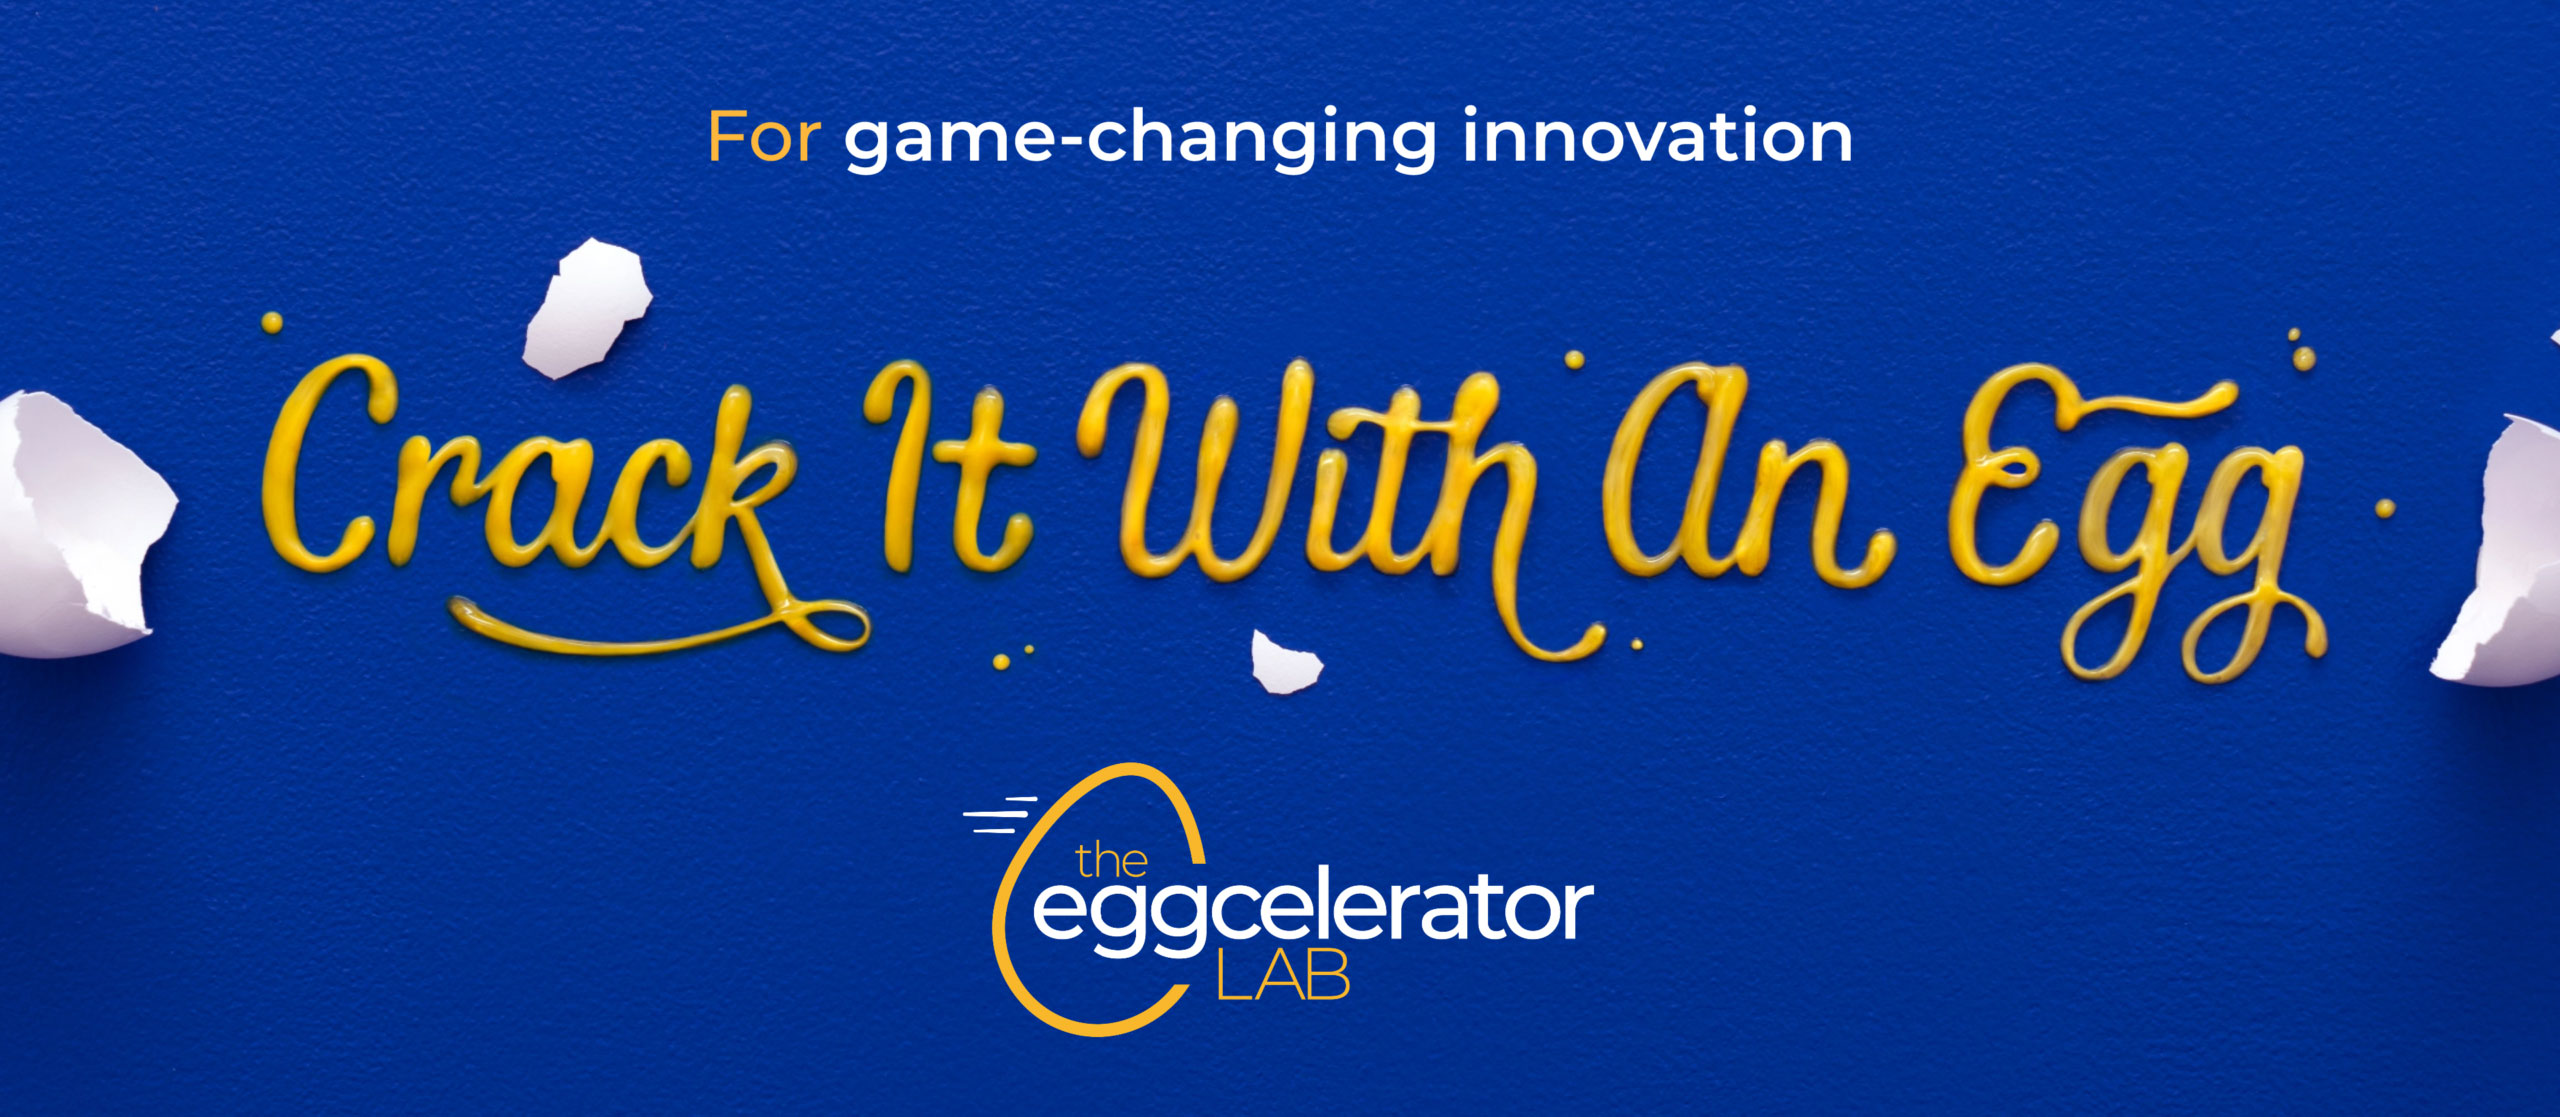 For game-changing innovation Crack It With An Egg - The Eggcelerator Lab